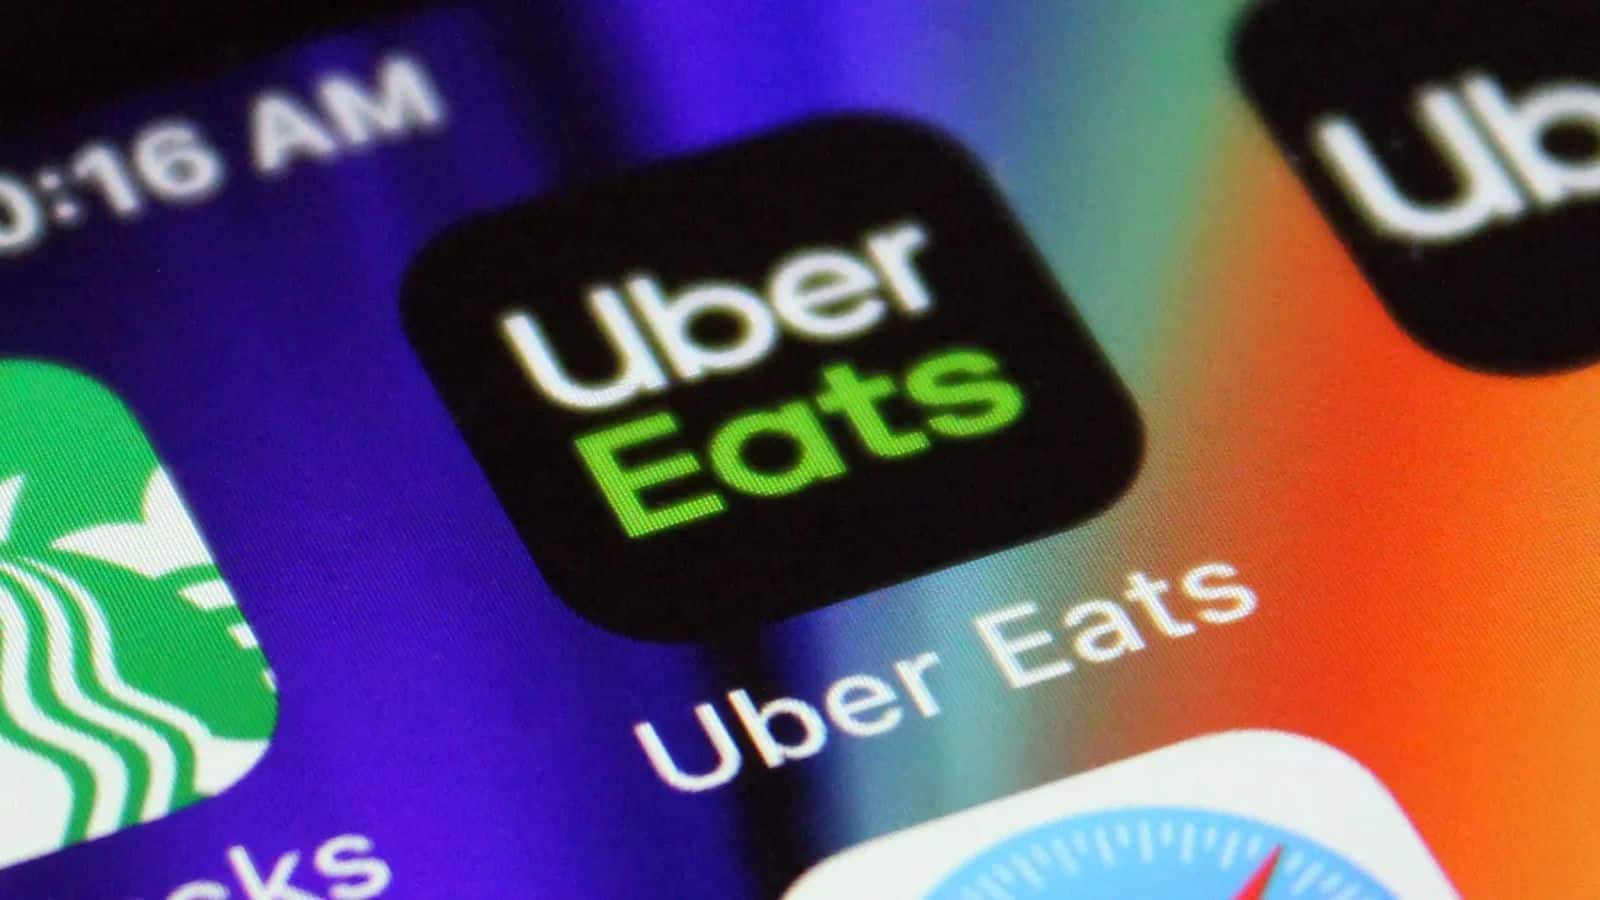 Uber Eats introduces TikTok-inspired video feed for food discovery